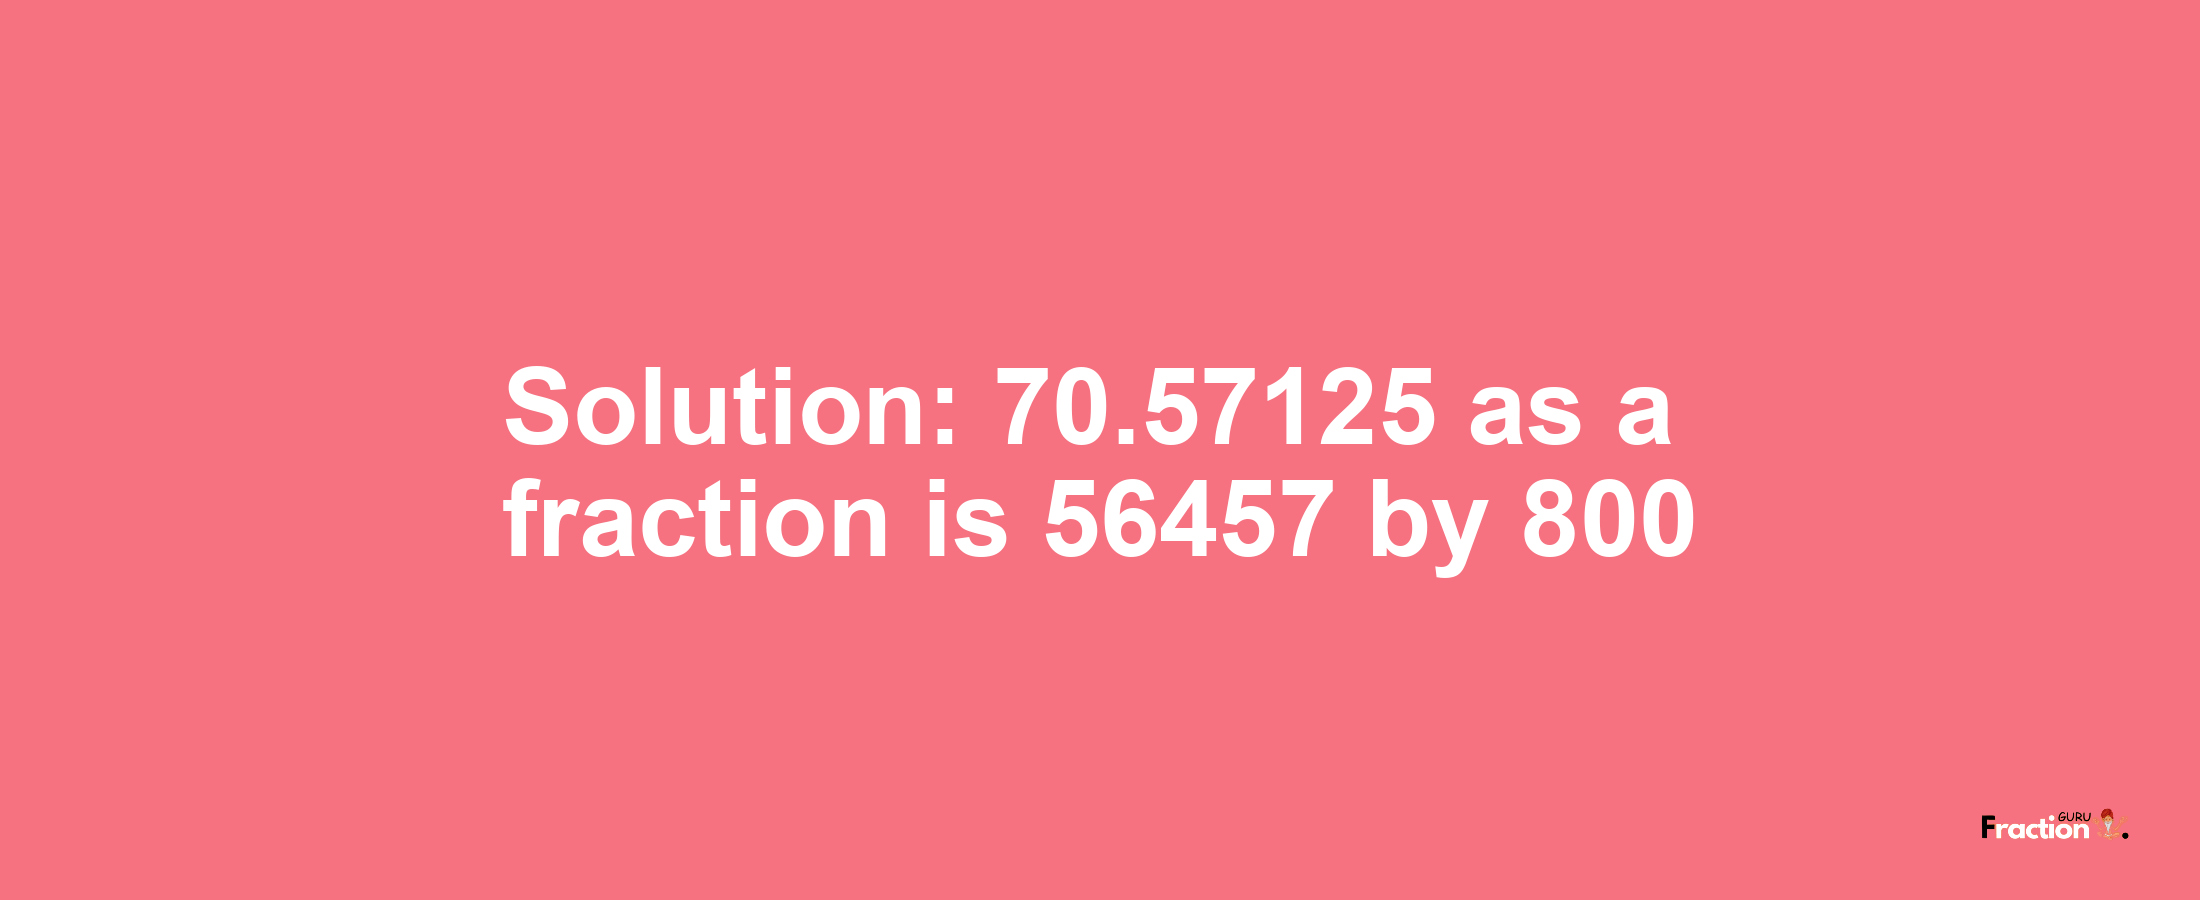 Solution:70.57125 as a fraction is 56457/800